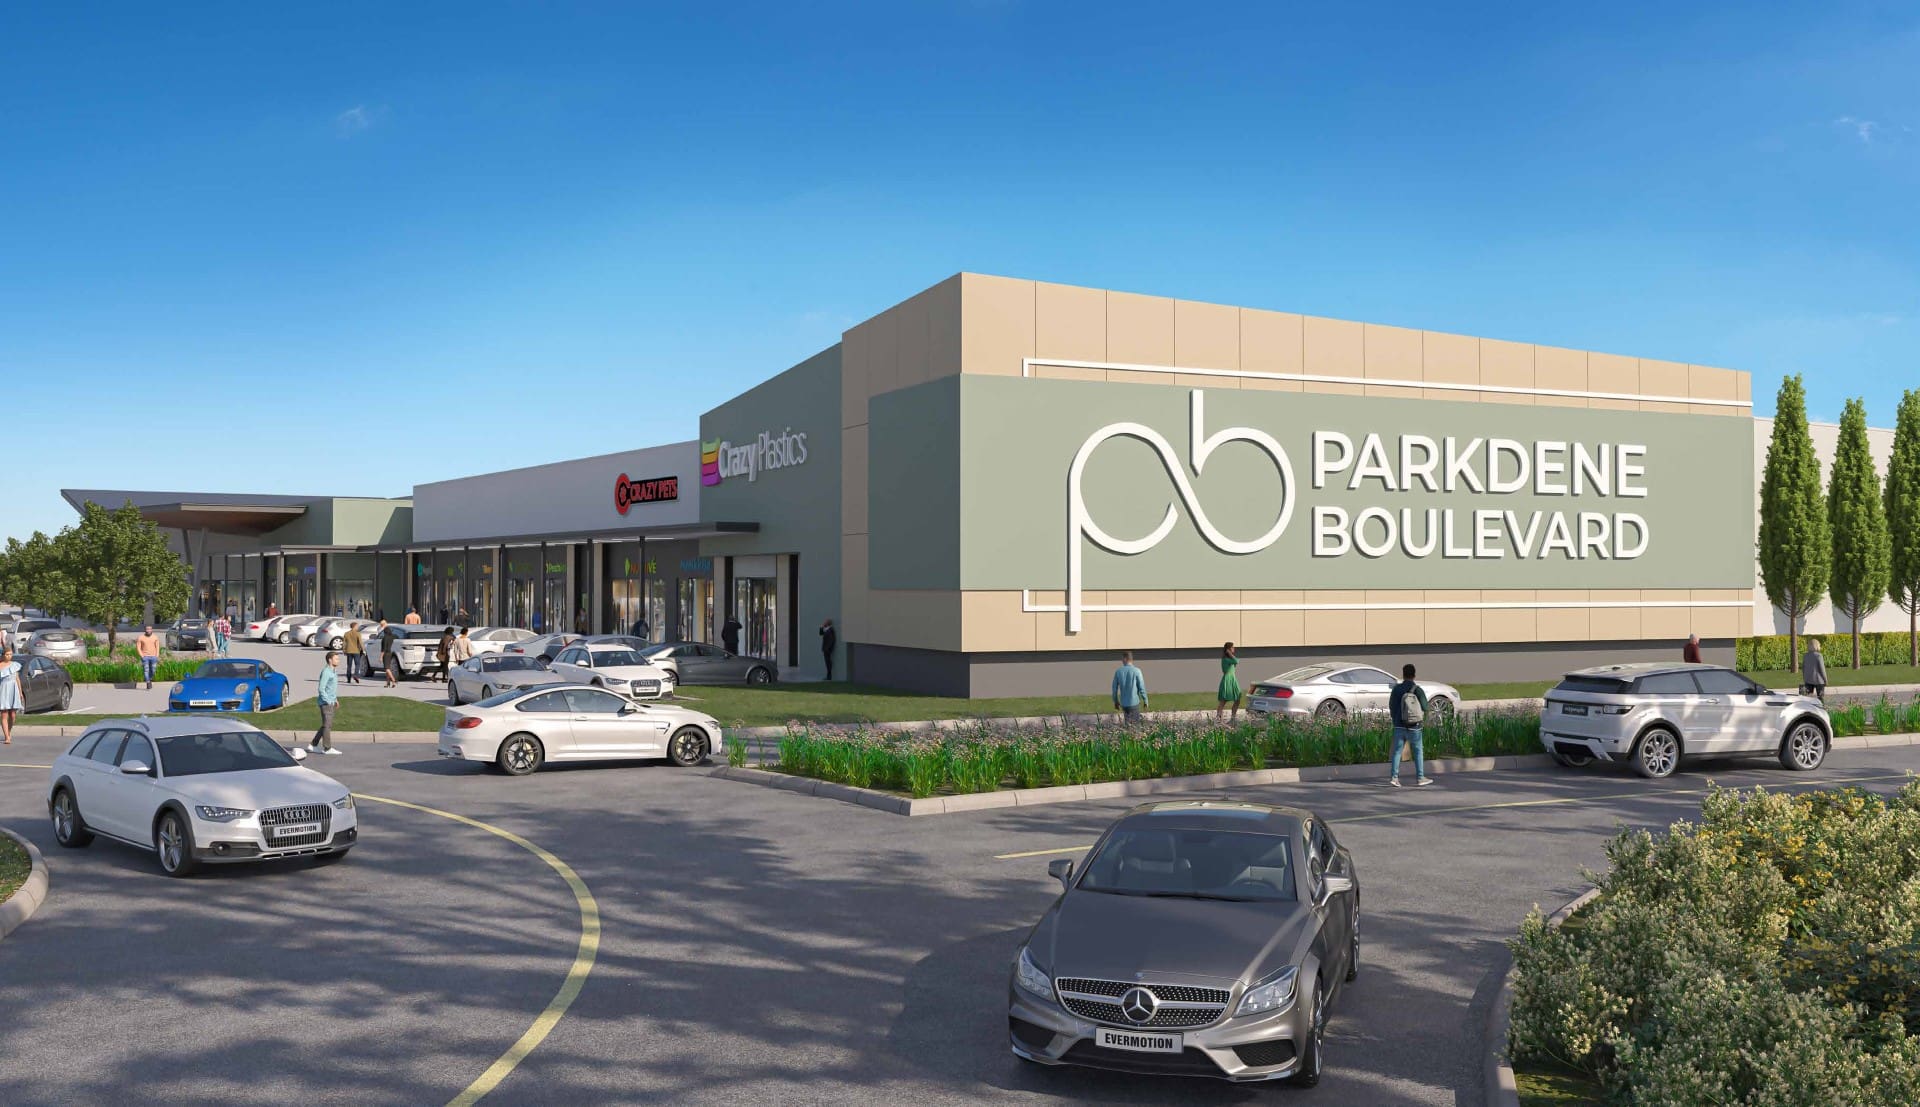 Construction has commenced on the redevelopment of Parkdene Boulevard, a retail centre in the burgeoning suburb of Parkdene in Boksburg, Ekurhuleni. It is set to open in October 2024. The 32,000sqm centre is being upgraded by Abland Property Developers and Retail Africa, which are both known for their innovative development approach, and is a collaboration with partners Nedbank CIB and the Ellerine Group. With a striking new design and a refreshed retail offering, Parkdene Boulevard will be a landmark centre in this part of the East Rand. The centre has long served Parkdene and the surrounding suburbs, being well located on a major thoroughfare, but had become tired and dated. At the same time, the suburb itself has undergone a period of redevelopment and expansion, with the construction of multiple high-density residential developments giving rise to increased demand for quality retail in the area. Grant Silverman, Director at Abland Property Developers, explains: “We are excited about the potential for Parkdene Boulevard to meet this need and provide an elevated shopping experience within an established yet growing node.” The redevelopment involves expanding the centre from 11,000sqm to approximately 32,000sqm and upgrading, expanding and modernising a long-standing Checkers Hyper located on the site. Checkers and other existing tenants, including Checkers Liquor and Spec Savers, will continue to trade throughout the construction period, with great care being taken to minimise any disruption. The development team is also excited to introduce additional tenants such as Crazy Plastics, Dis-Chem and Edgars, as well as various food options. It will also offer two new drive-throughs, with Burger King and KFC joining the existing McDonald’s Drive-Thru, all conveniently positioned for both local residents and the many commuters in the area. “The time is ideal for this redevelopment project, which will revitalise an established retail centre on a highly accessible and well-located site,” says Richard O’Sullivan, Executive Director of Retail Africa. Having grown up in Boksburg and having a passion for his hometown and community, he has witnessed the changing fortunes of the area over decades. The redevelopment project will introduce complementary retail offerings, services and restaurants, as well as landscaped green areas, to elevate the overall shopping and customer experience. Construction is well on track for the new Parkdene Boulevard’s completion in October 2024.